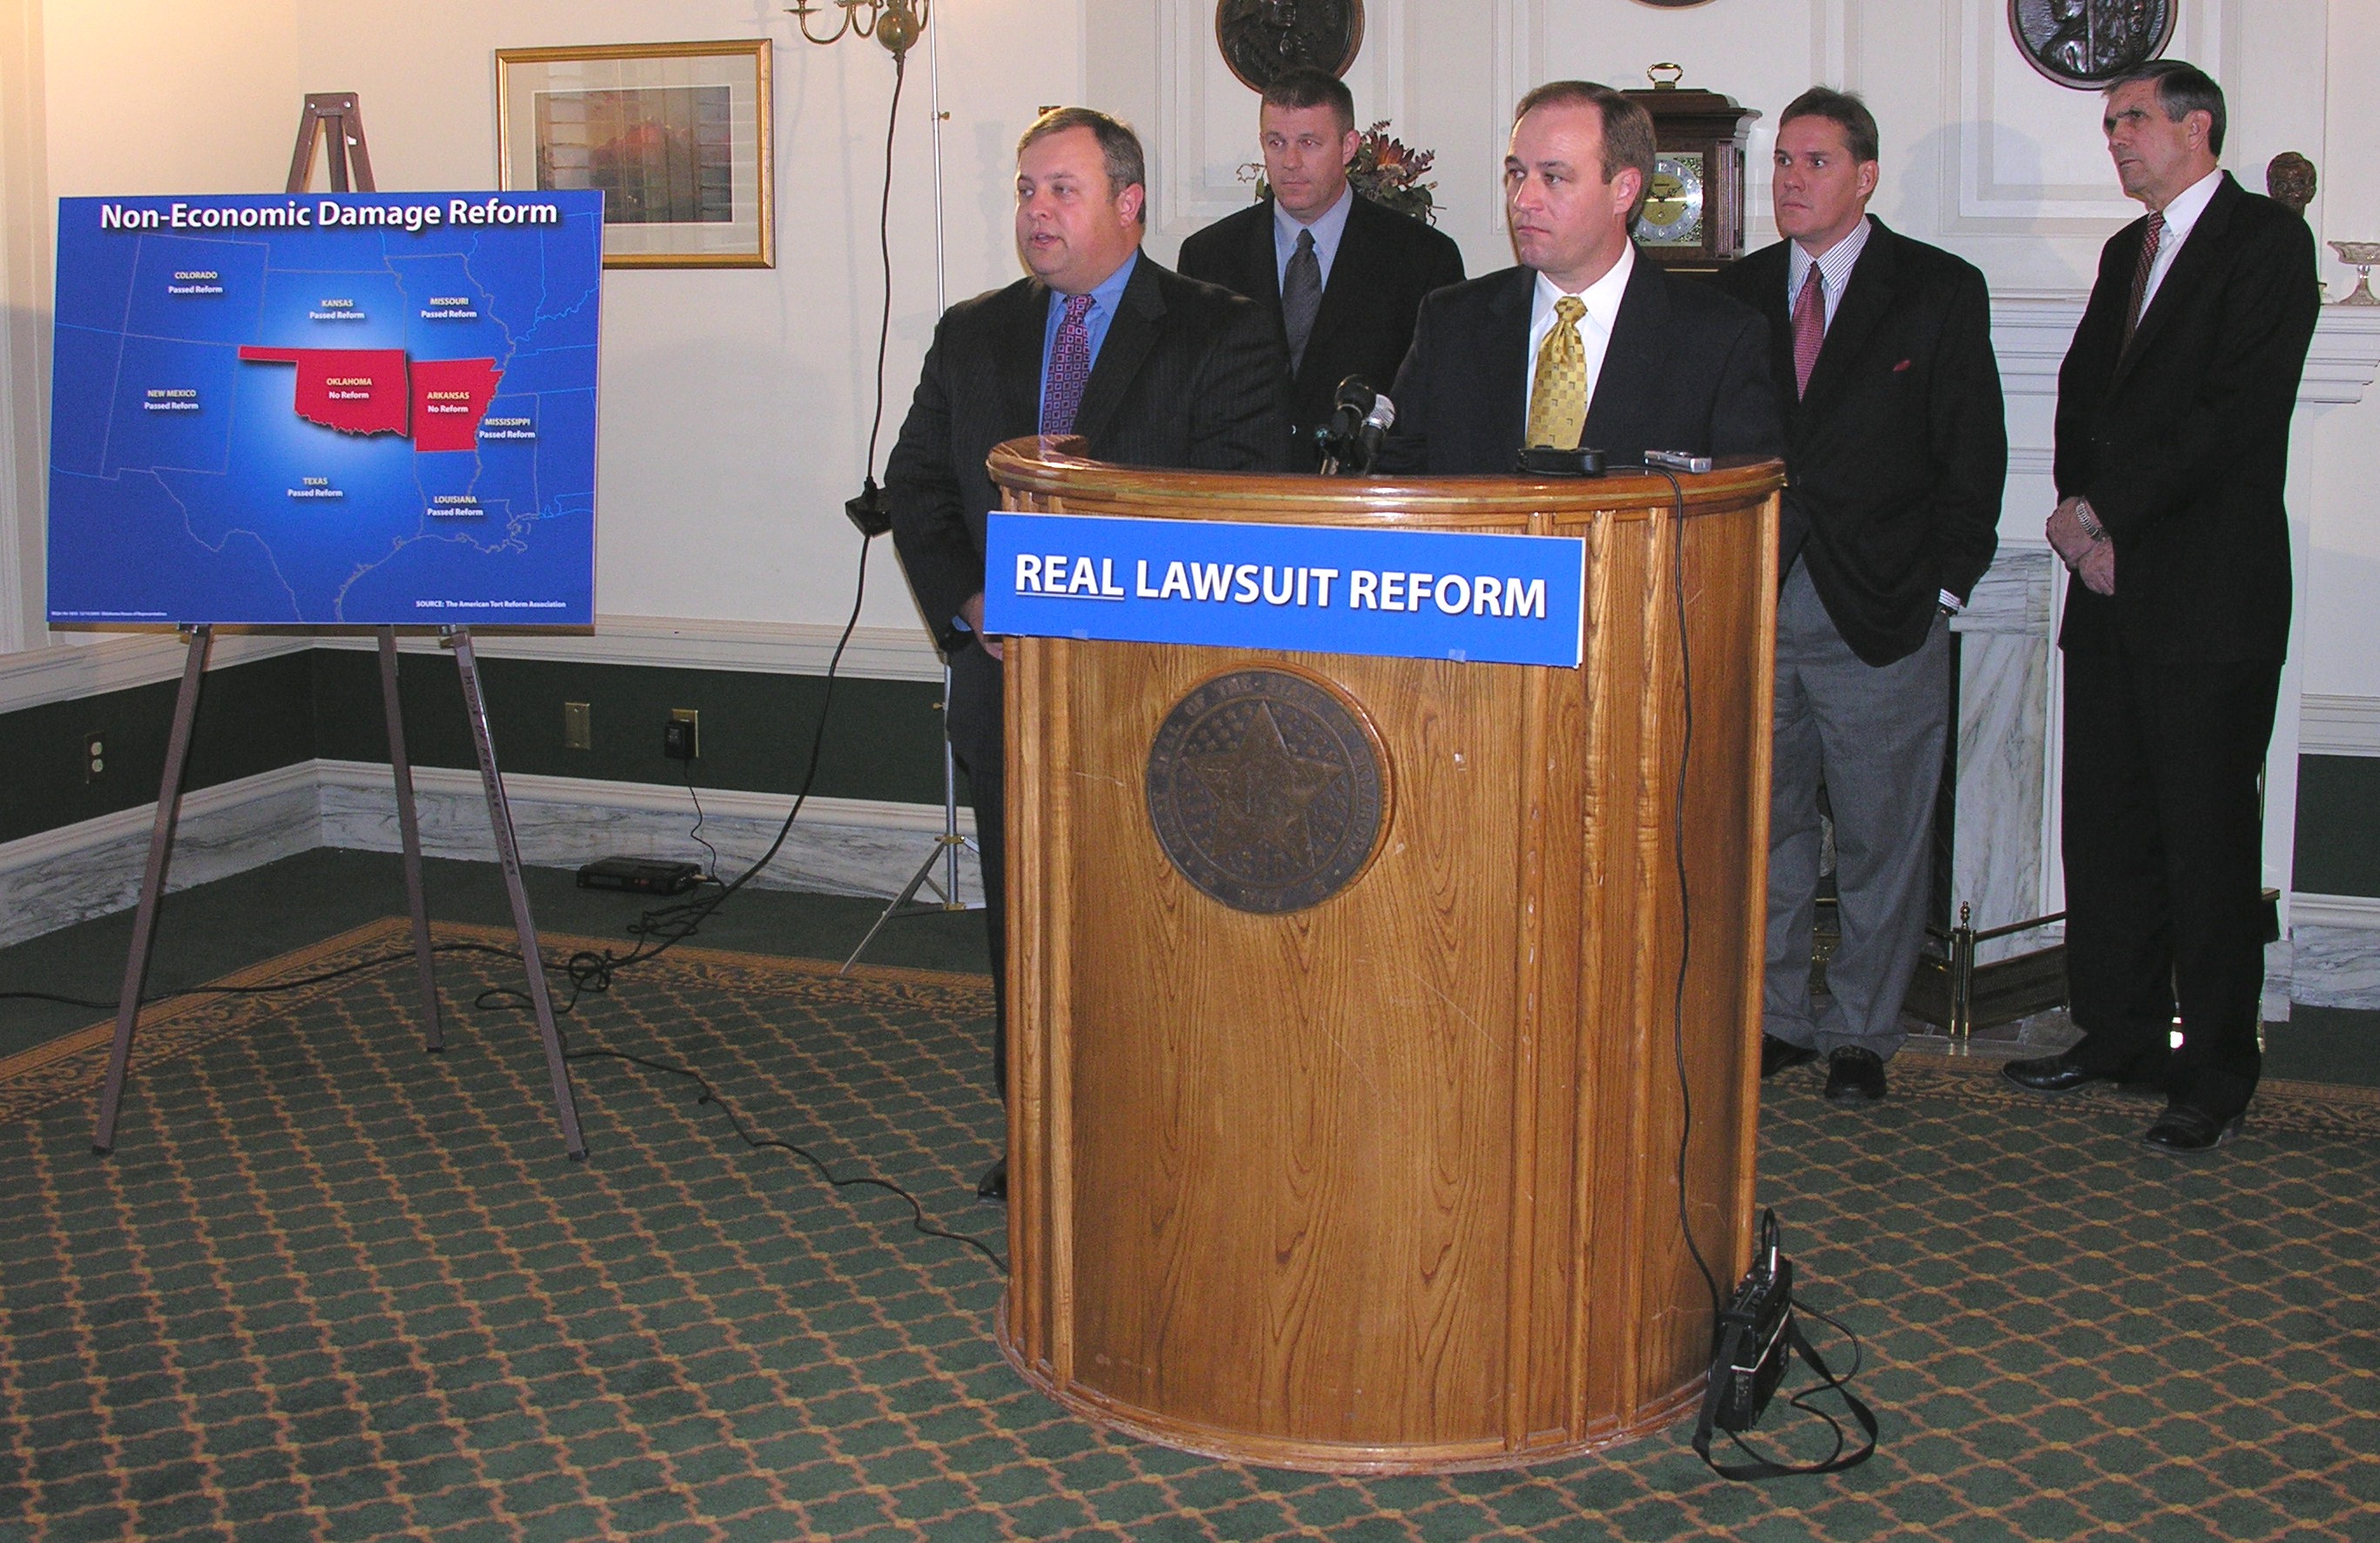 Senator Glenn Coffee and Rep. Todd Hiett along with Rep. Kevin Calvey, Senators Cliff Branan and Ron Justice take questions from the press after the announcement of their 2006 lawsuit reform agenda.